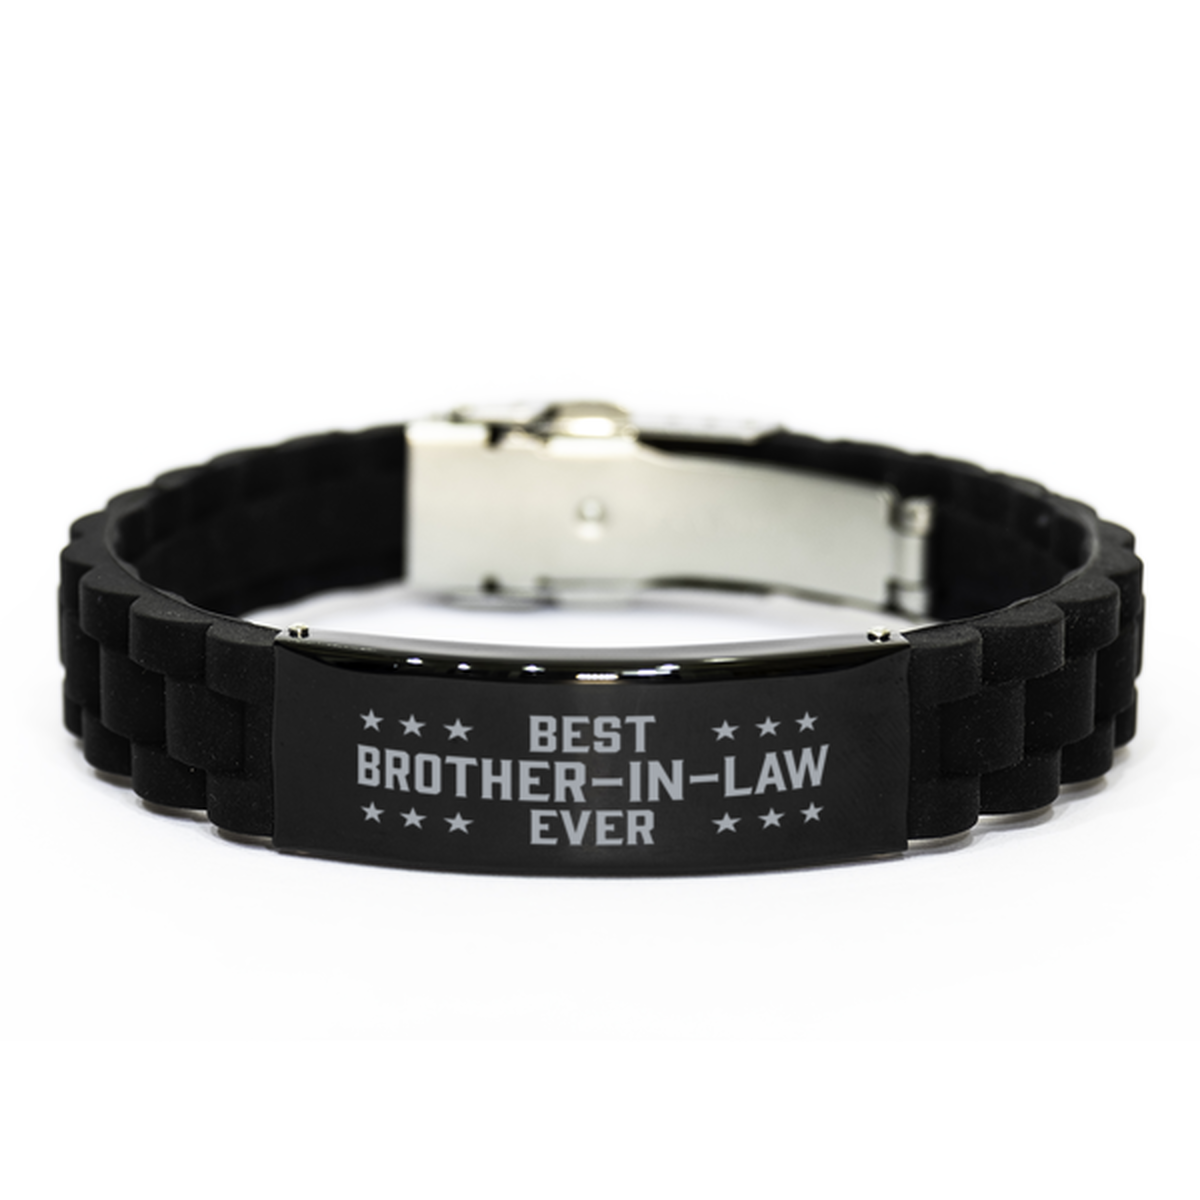 Best Brother-in-law Ever Brother-in-law Gifts, Funny Black Engraved Bracelet For Brother-in-law, Family Gifts For Men